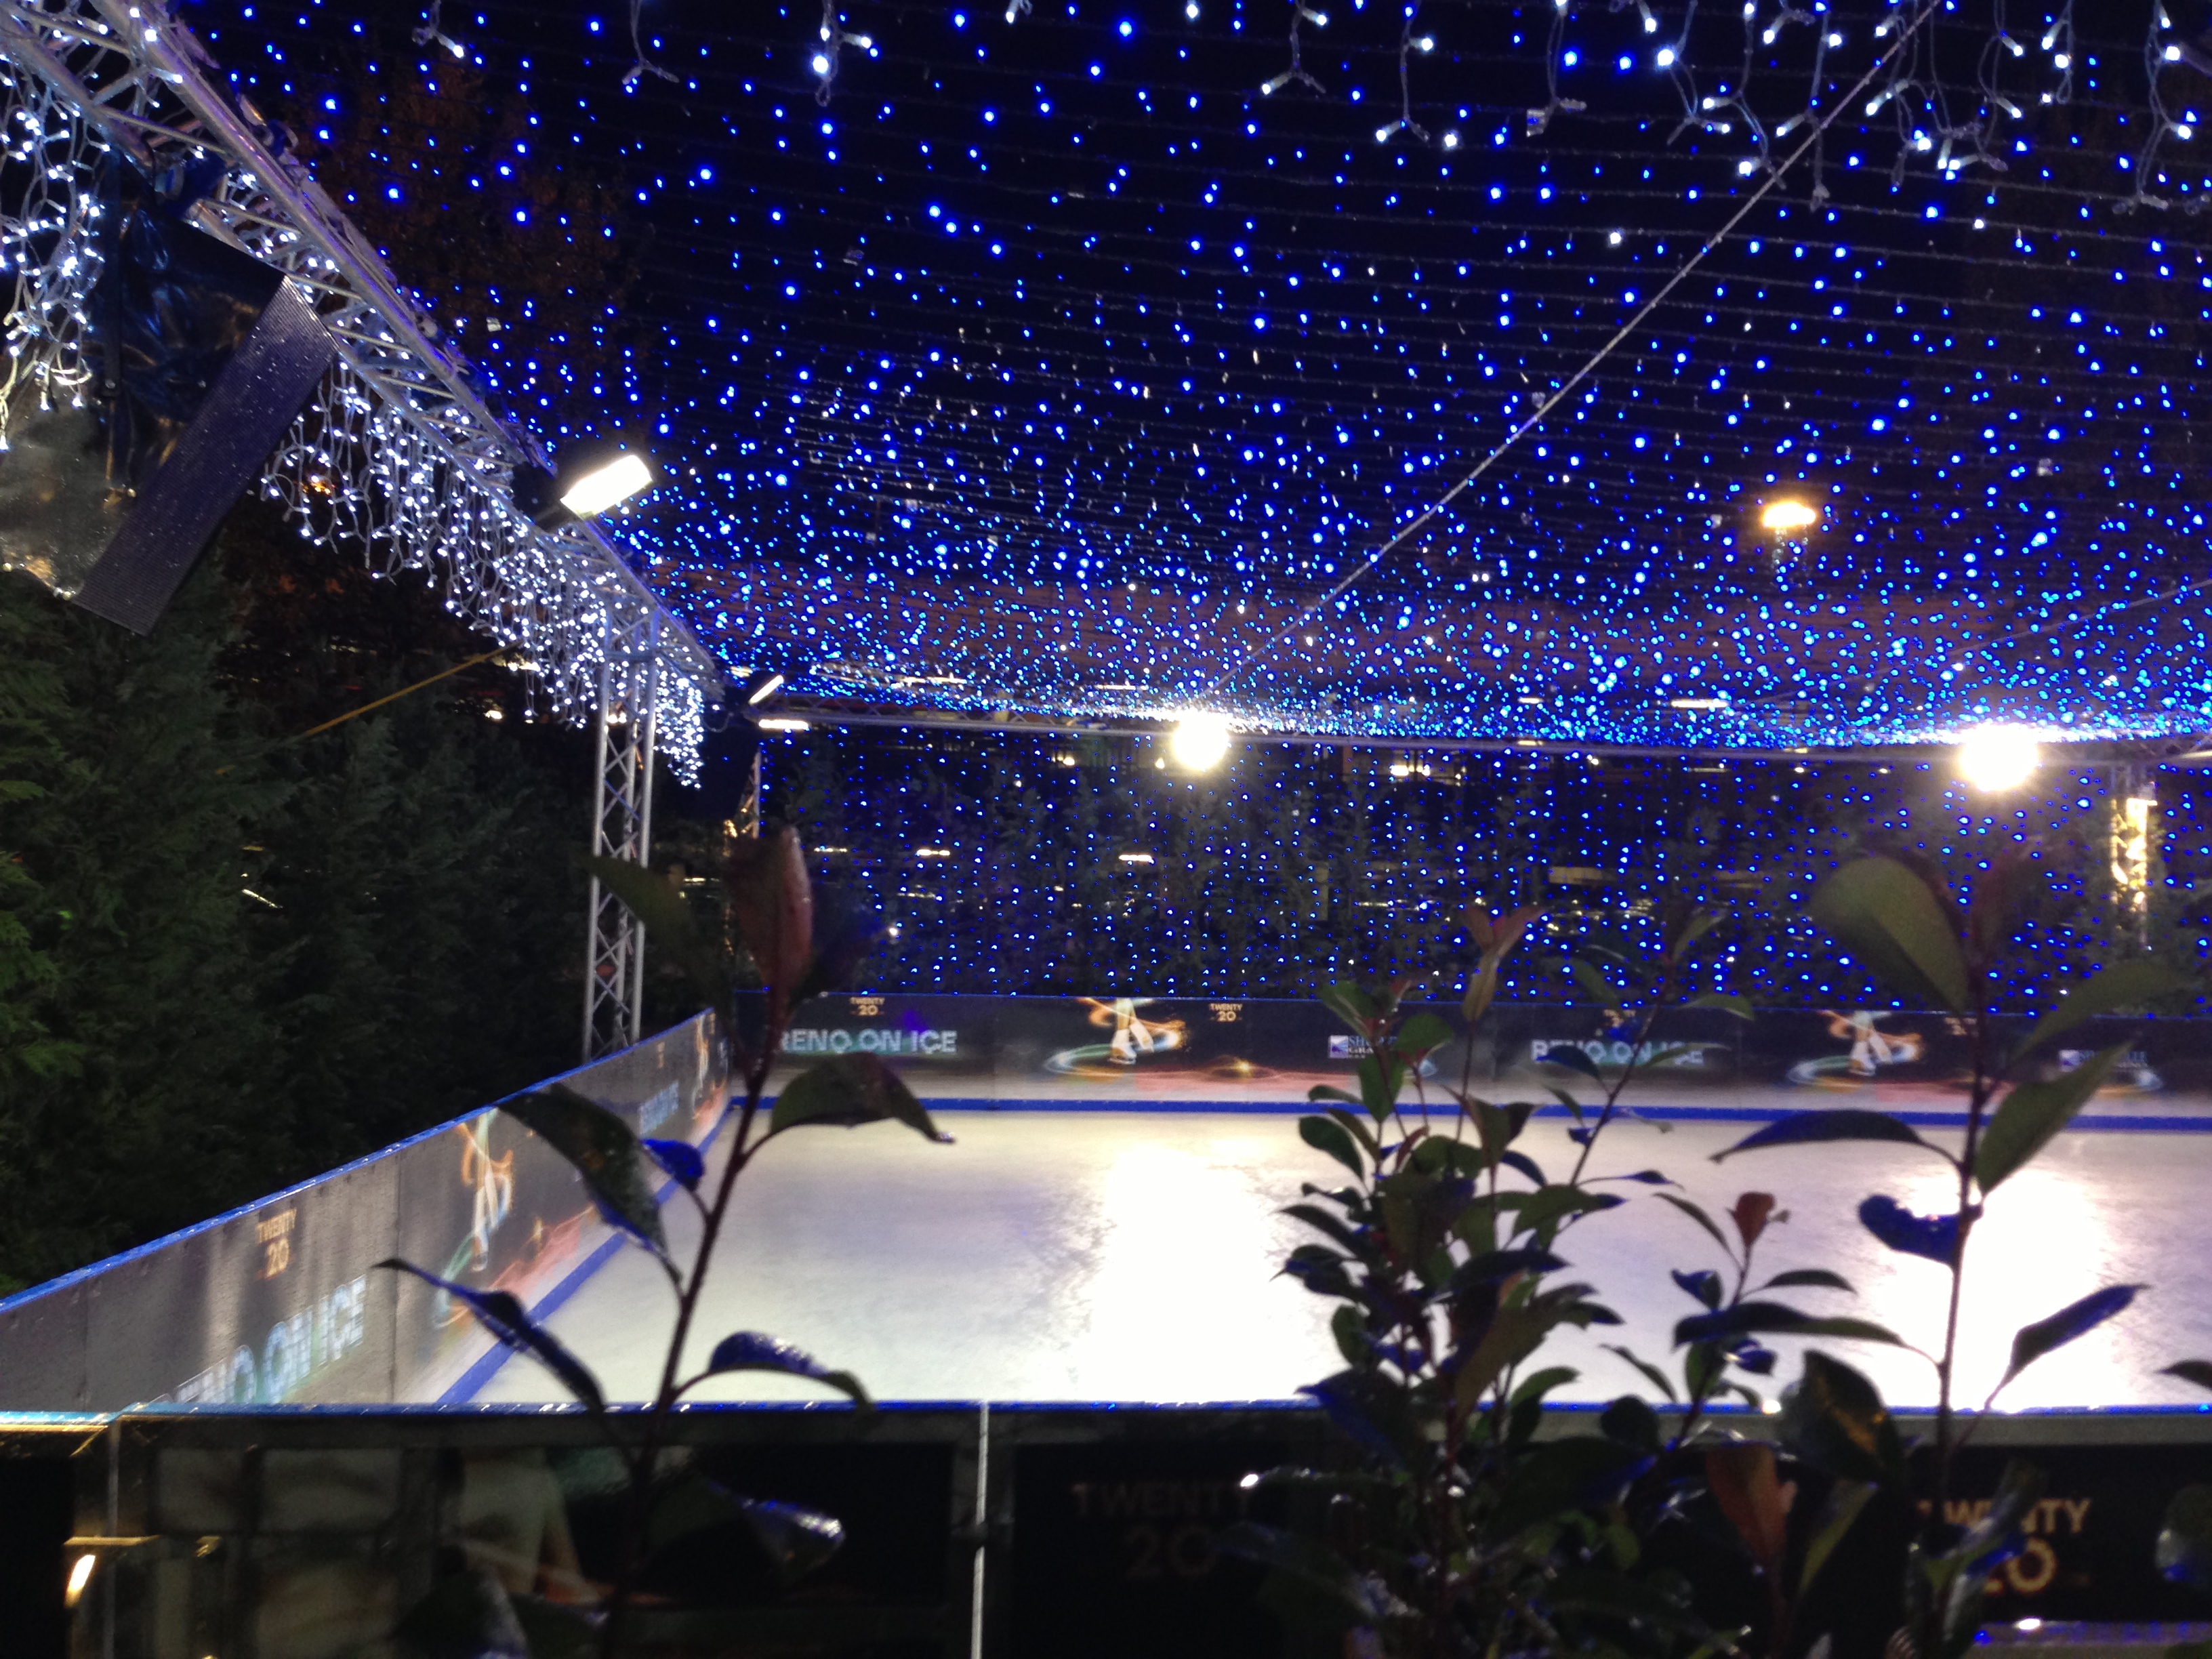 Real Ice Rink